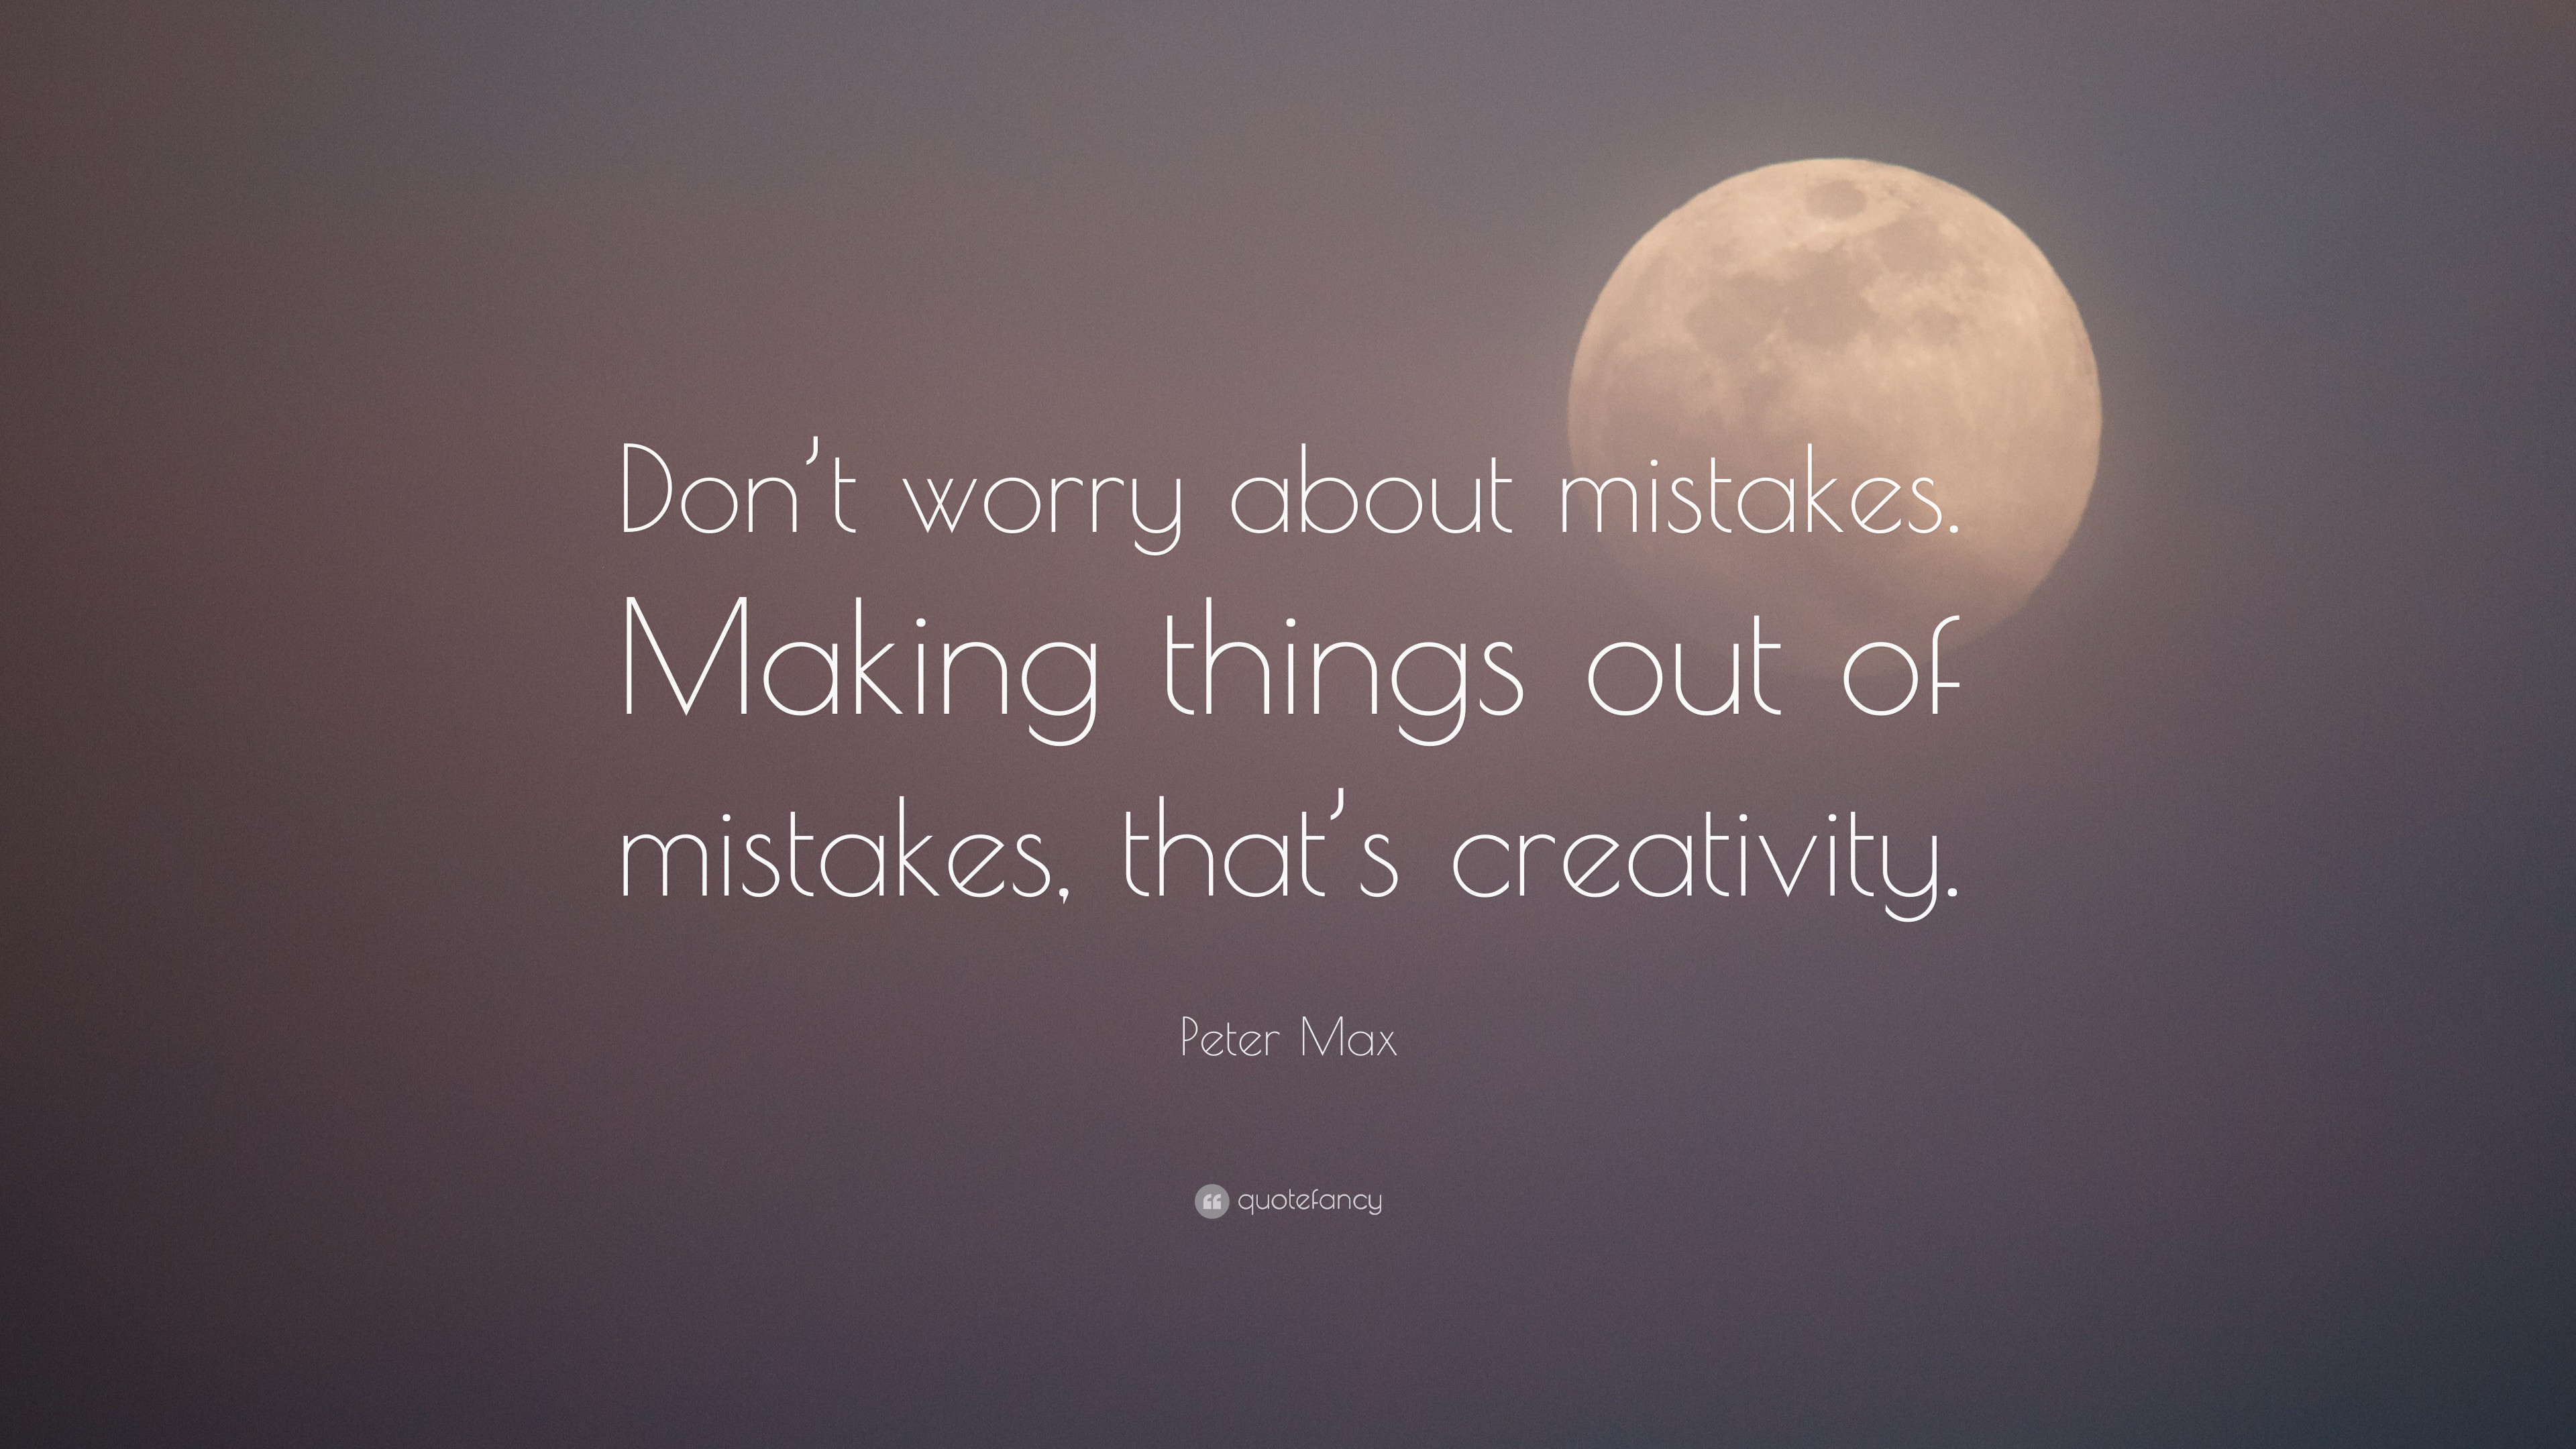 3840x2160 Peter Max Quote: “Don't worry about mistakes. Making things out of